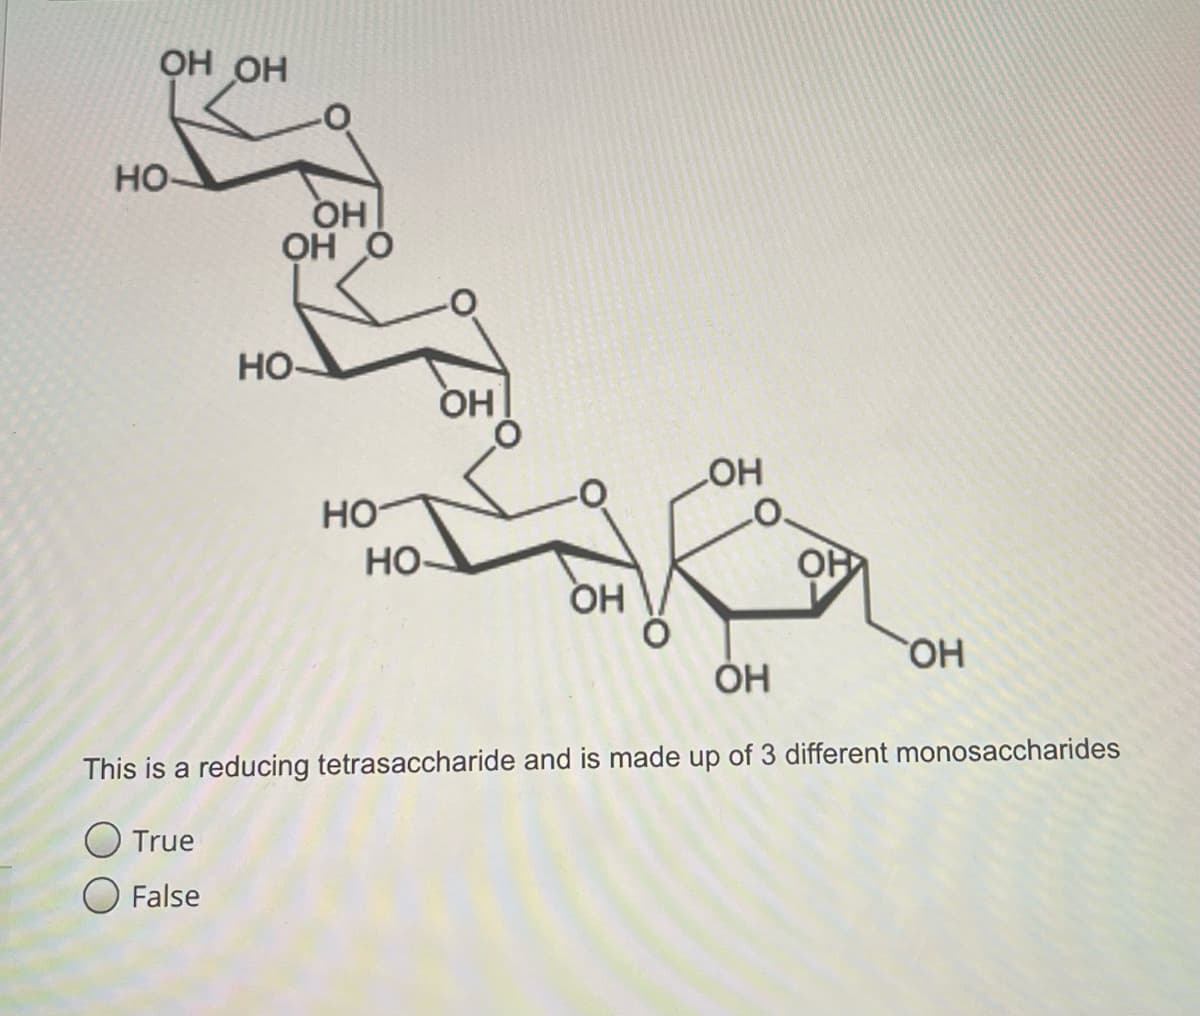 OH OH
но-
OH
OH Ó
но-
OH
но
HO
Но-
OH
HO.
ÓH
This is a reducing tetrasaccharide and is made up of 3 different monosaccharides
O True
O False
